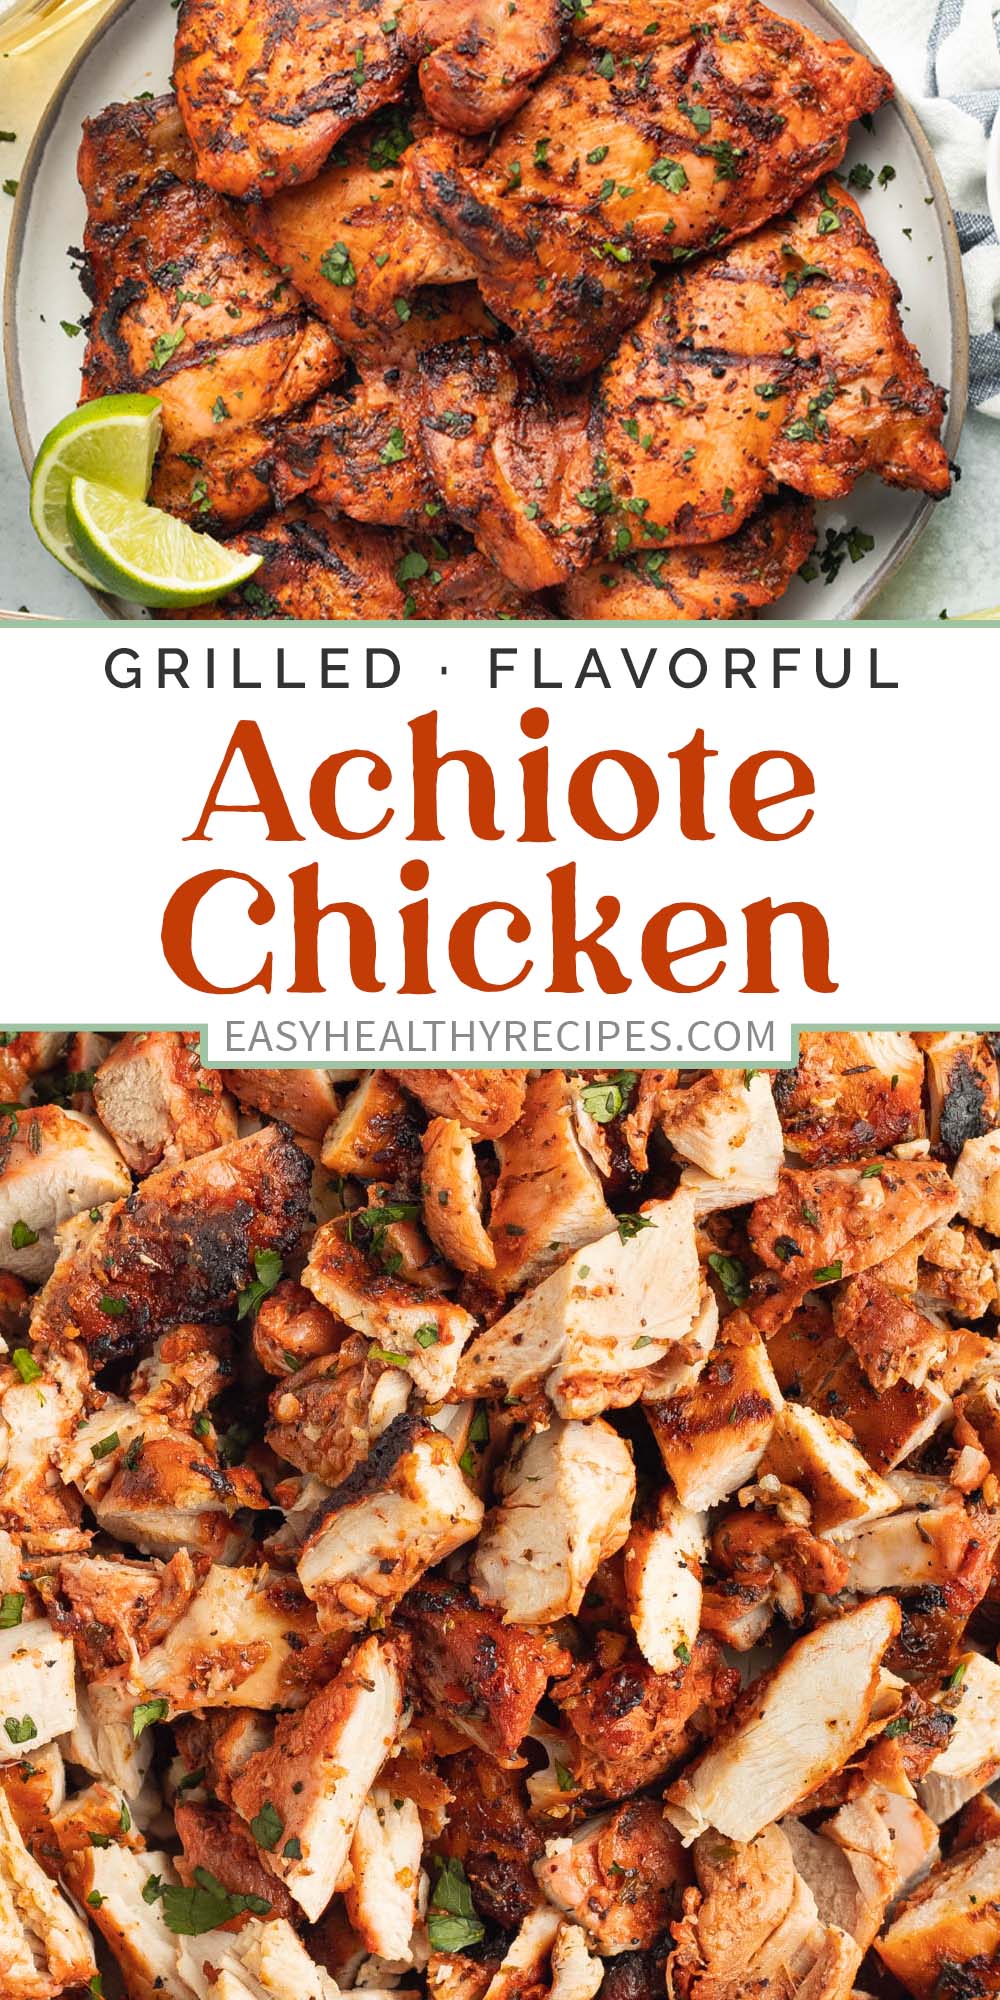 Pin graphic for achiote chicken.